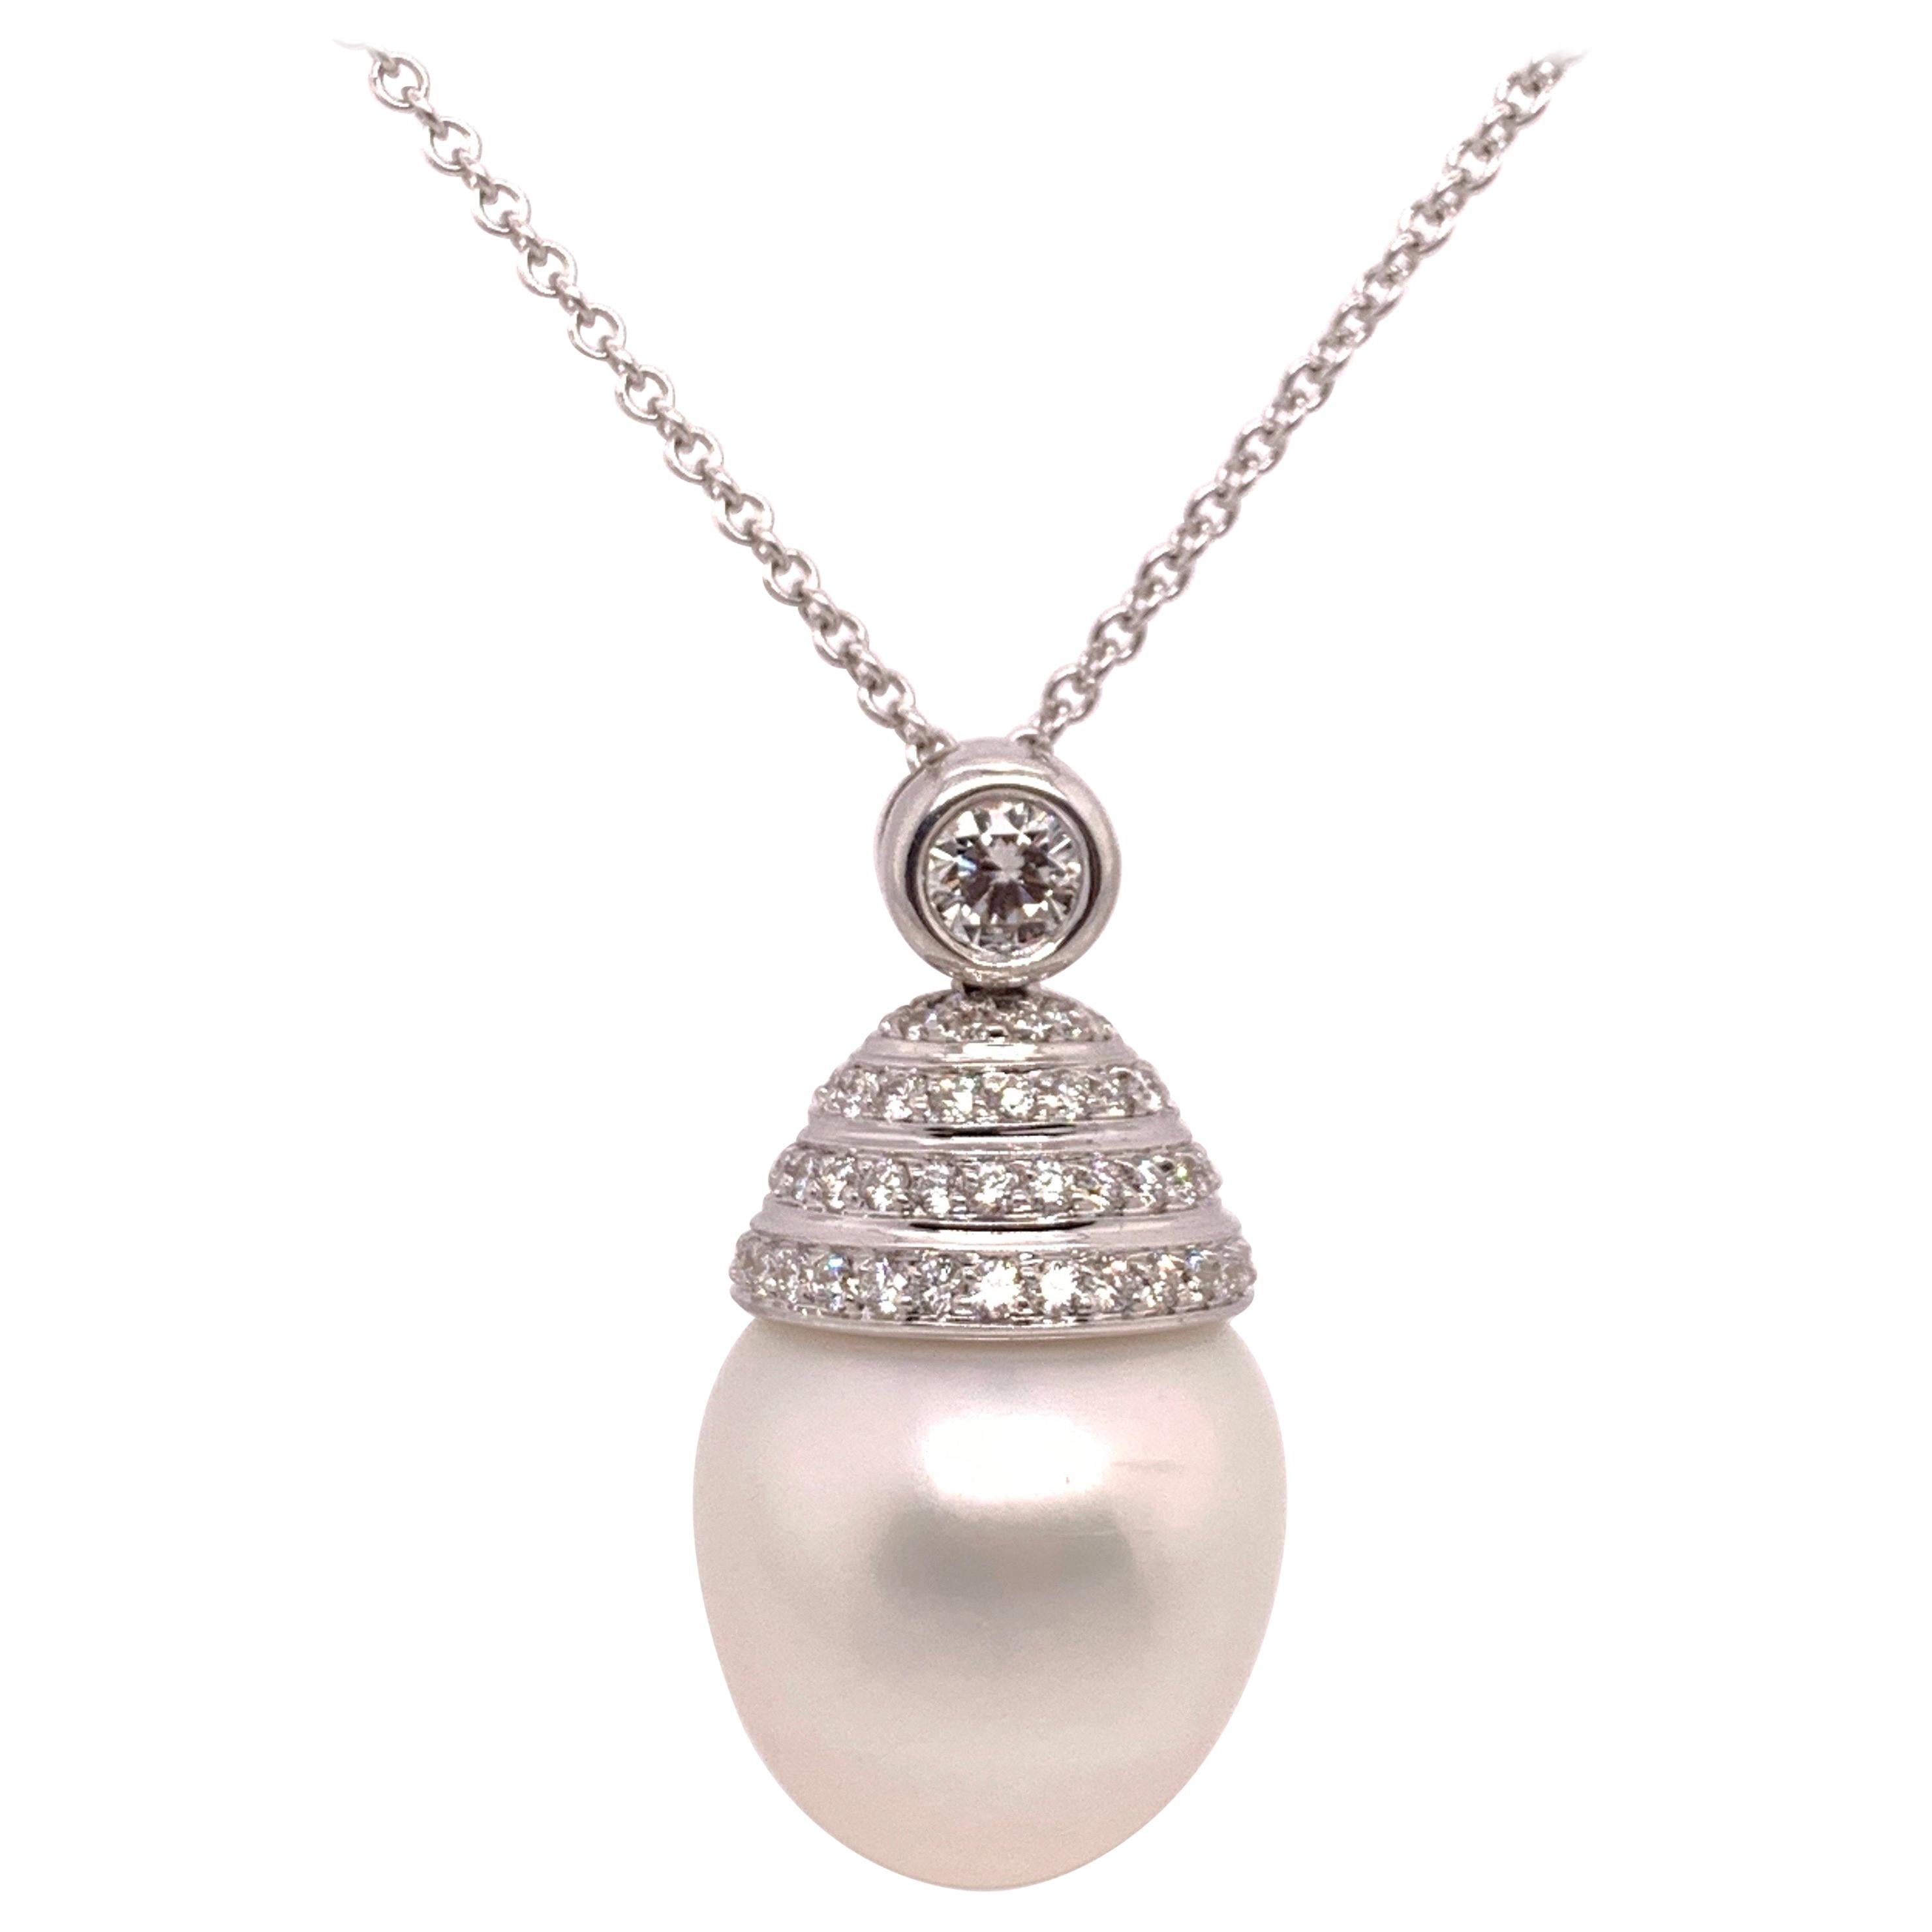 South Sea Pearl Gold Pendant 1.60 Carat Natural Colorless RBC Diamond Necklace